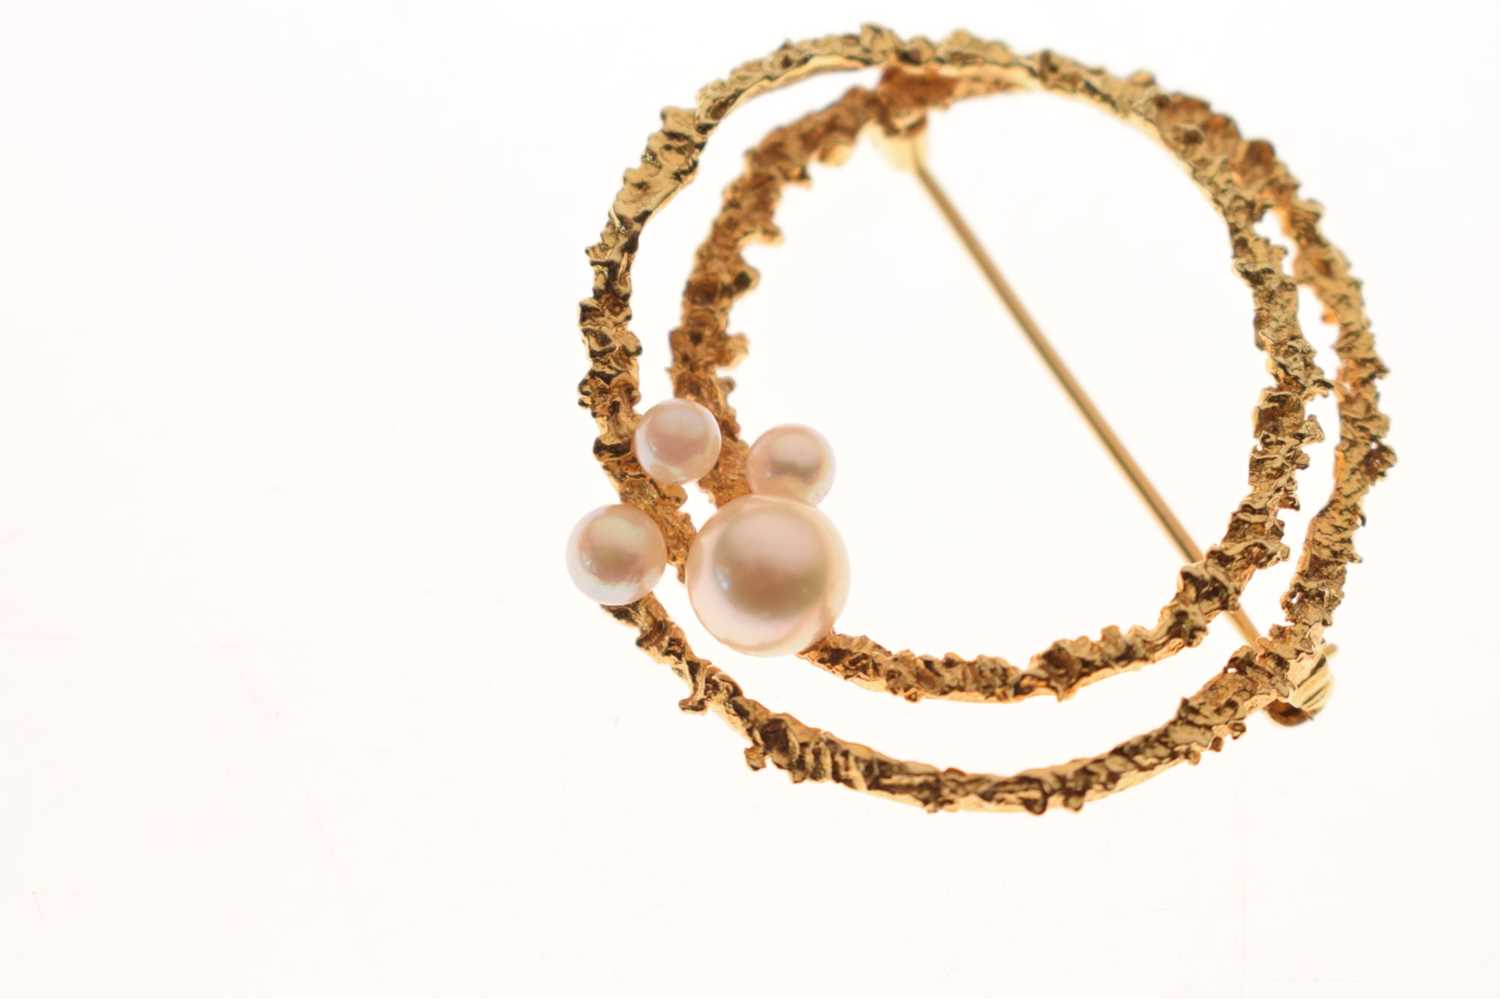 Modernist circular brooch of two entwined textured rings set four graduated cultured pearls - Image 2 of 5